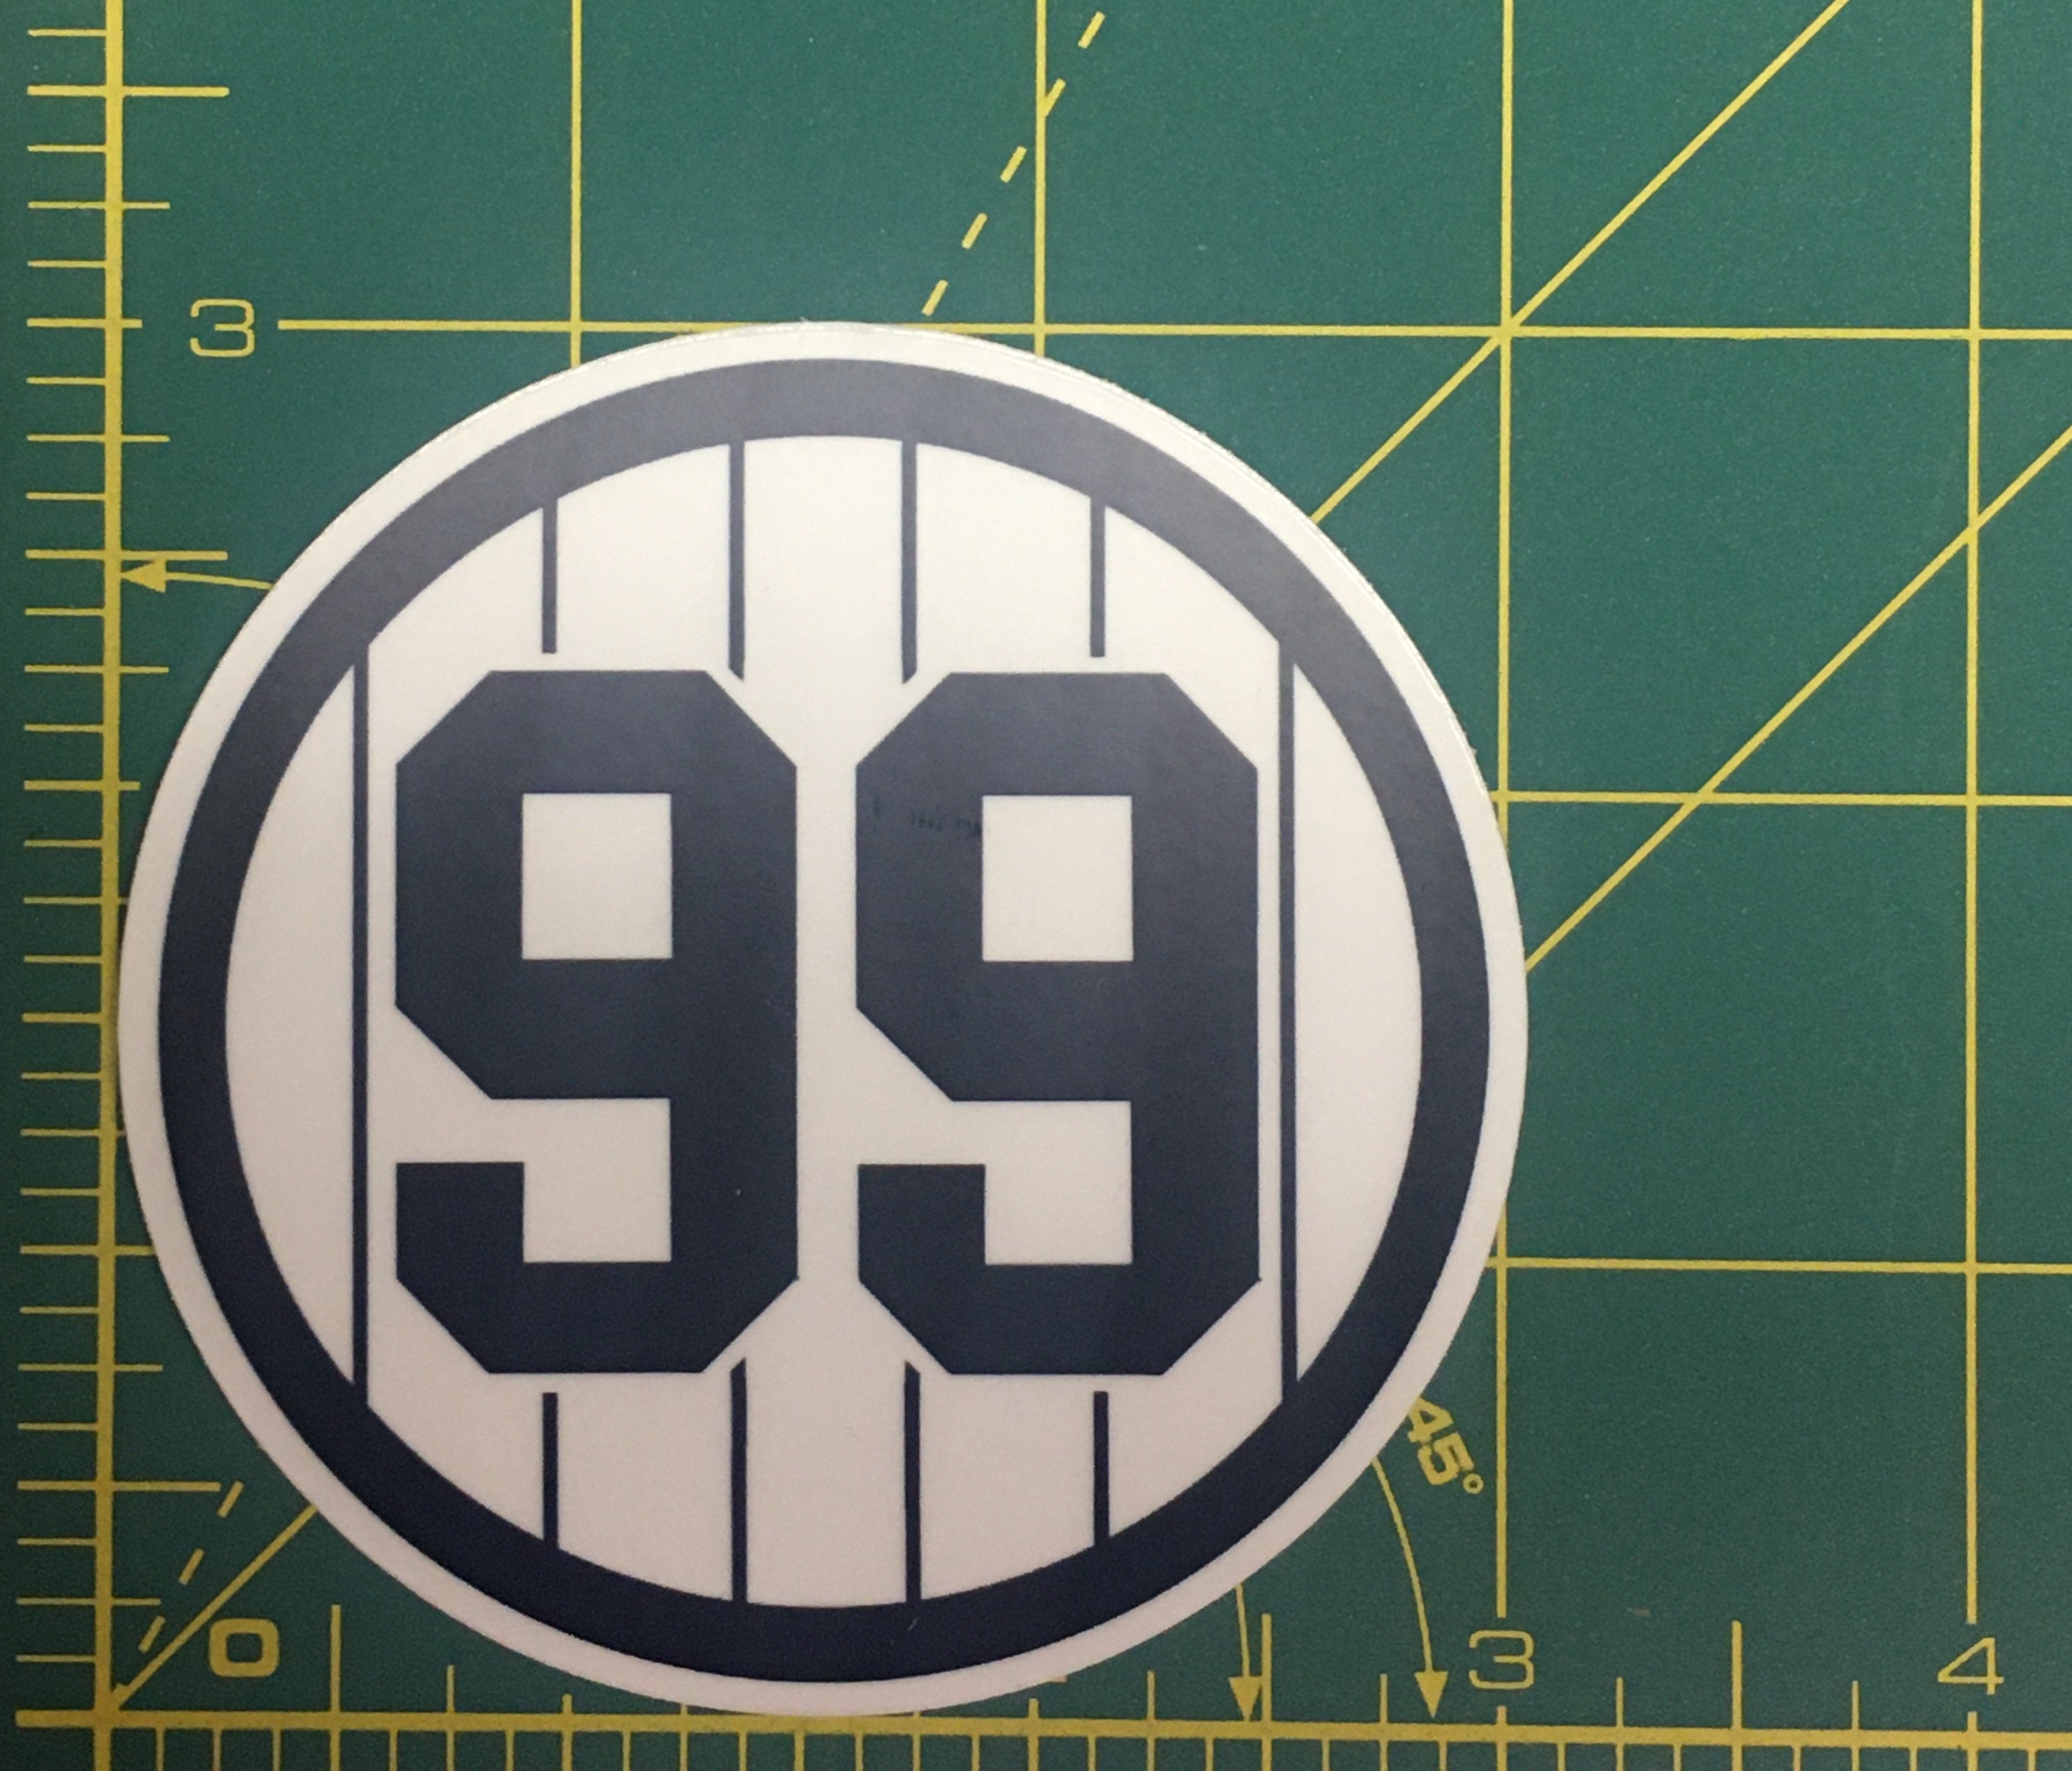 Aaron Judge #99 Patch - Jersey Number Baseball Sew or Iron-On Embroidered  Patch 2 1/2 x 2 3/4 at 's Sports Collectibles Store